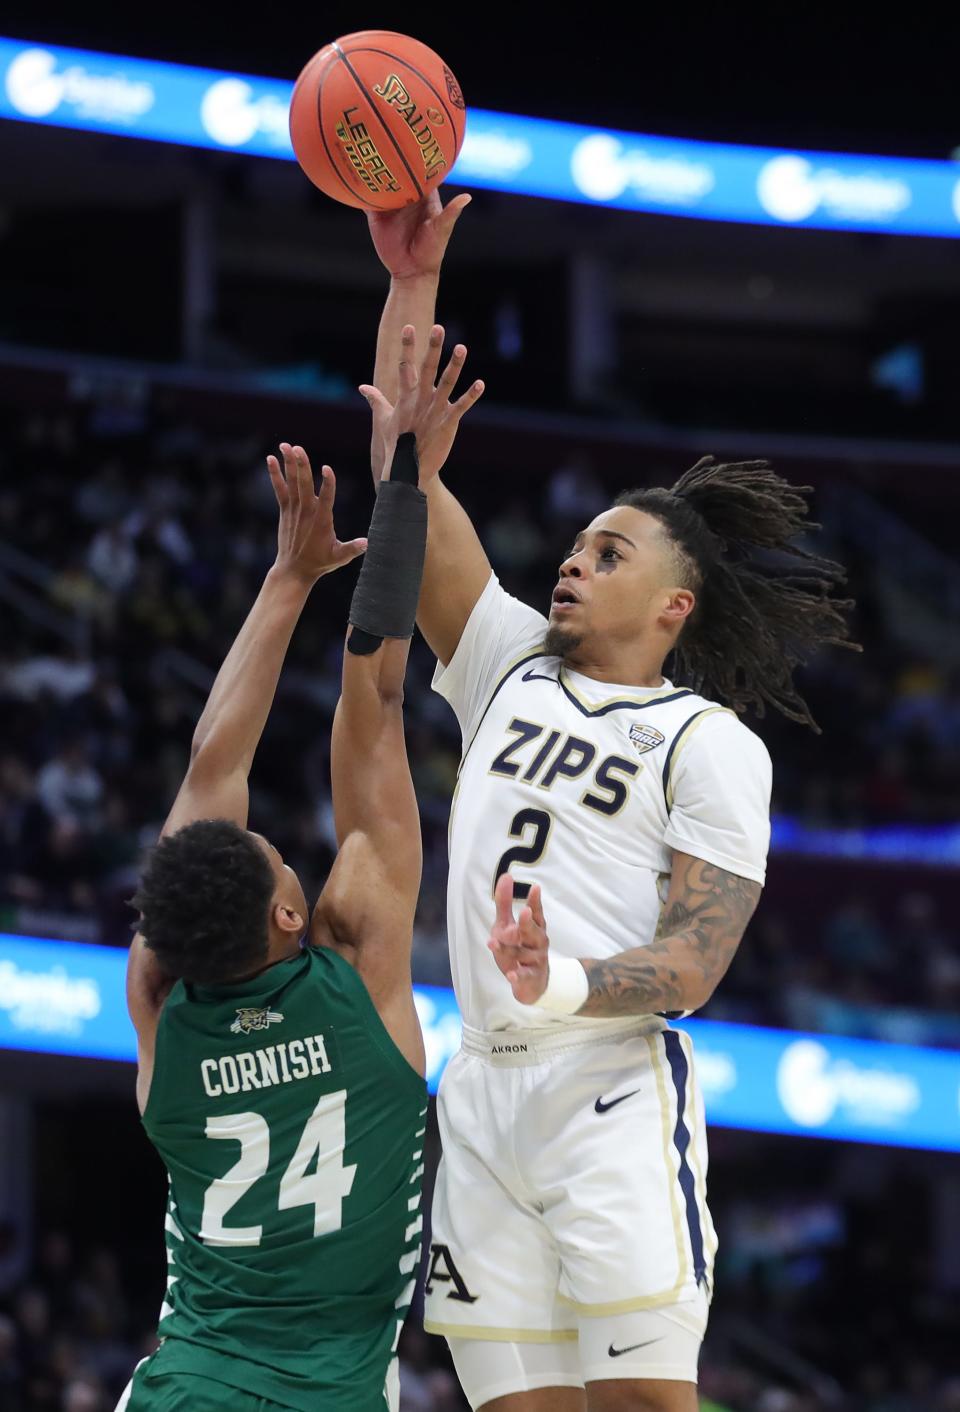 Akron's Greg Tribble (2) shoots over Ohio's Ike Cornish (24) in the semifinals of the Mid-American Conference Tournament on Friday in Cleveland.